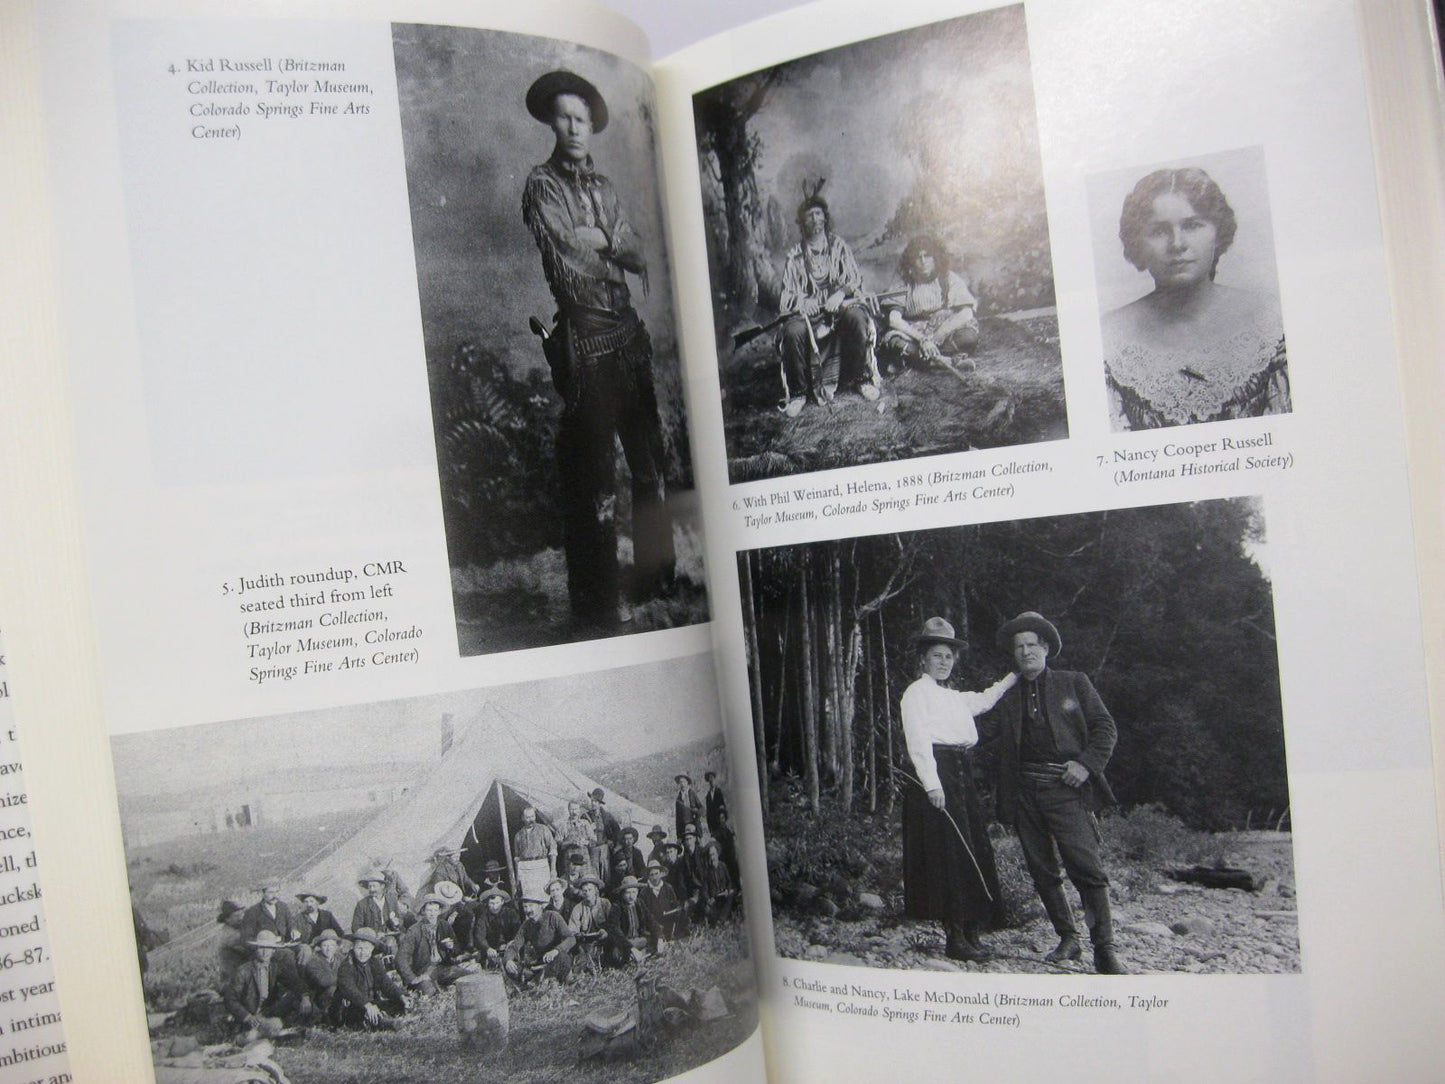 Charles M. Russell: The Life and Legend of America's Cowboy Artist by John Taliaferro